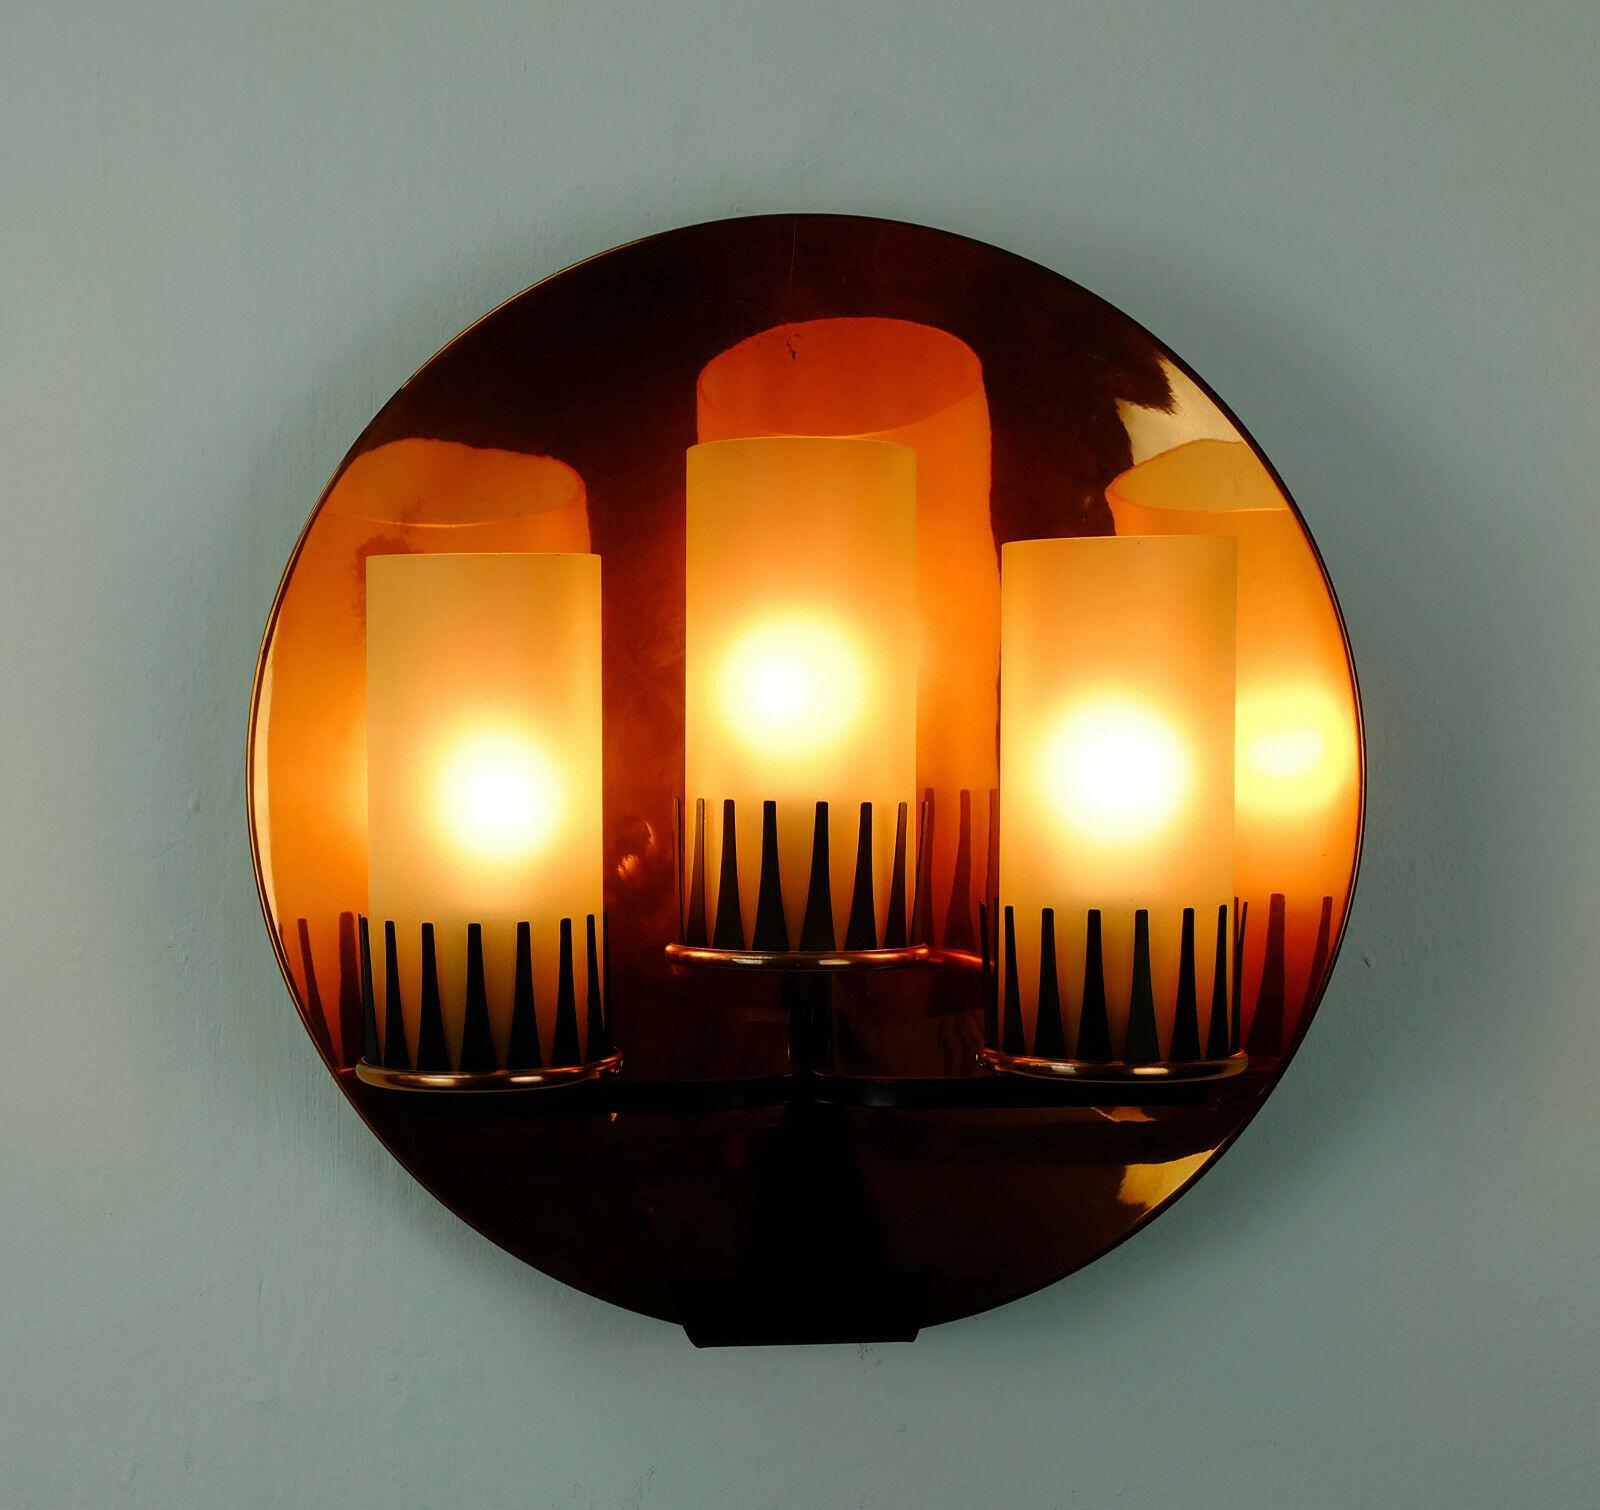 Fantastic 1950s to early 1960s wall lamp. The base is a round concave copper disc. It holds the frame which is made of black metal and copper. The shades are made of yellowish matte glass. 

Good condition, no damages at the glass, some wear at